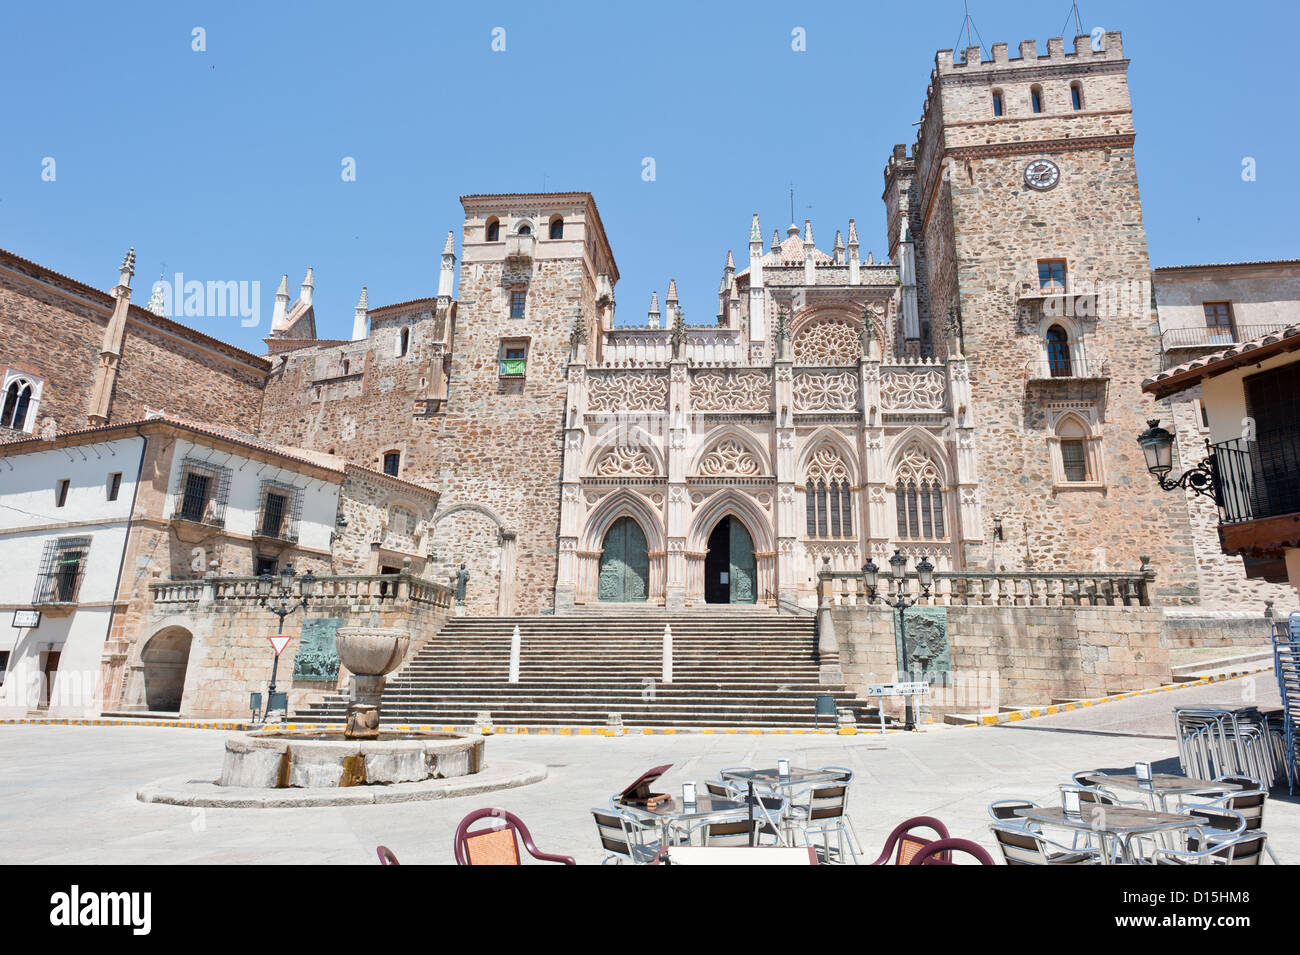 Guadalupe, Spain: Royal Monastery of Santa Maria de Guadalupe located in the Plaza Mayor of Guadalupe, Caceres Province. Stock Photo